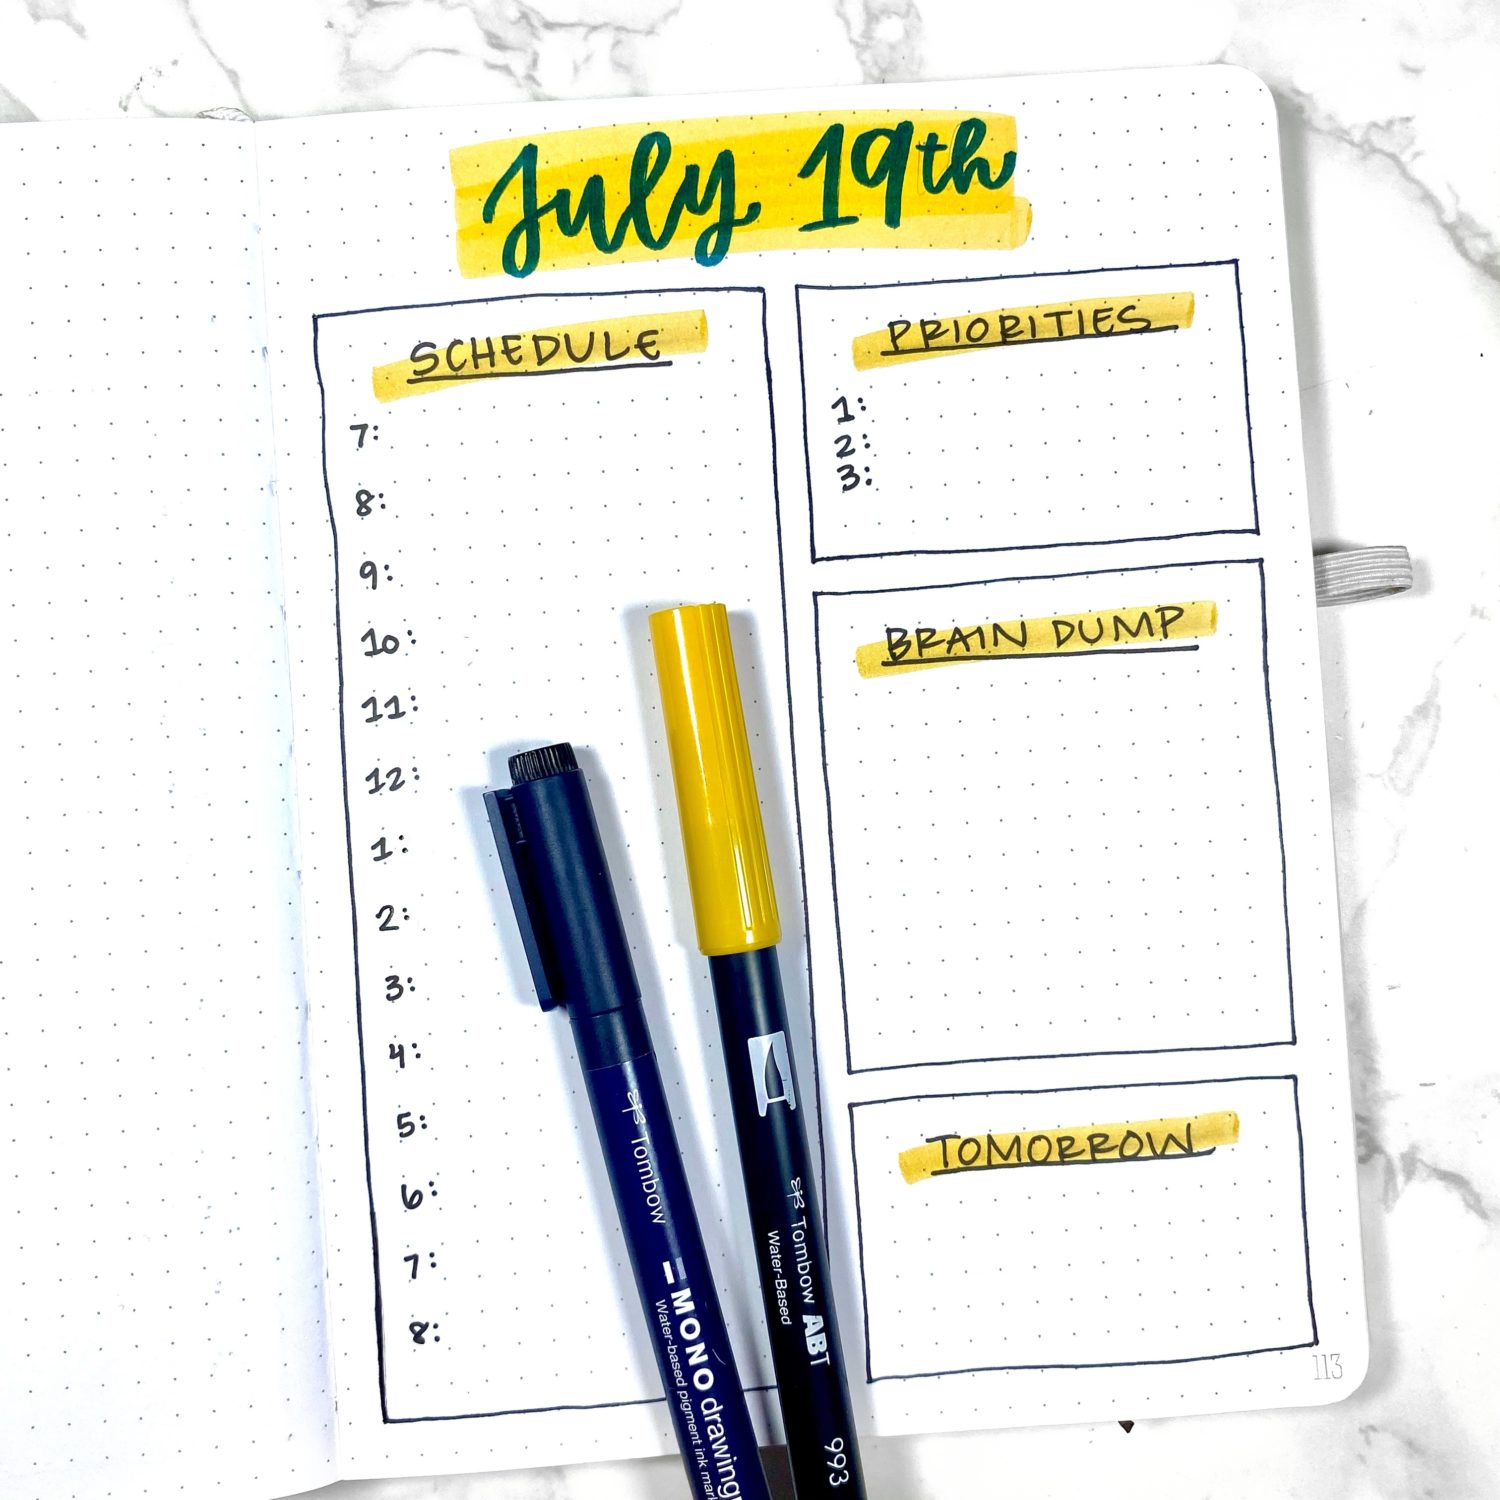 Daily Journal Spread Tutorial - Tombow USA Blog